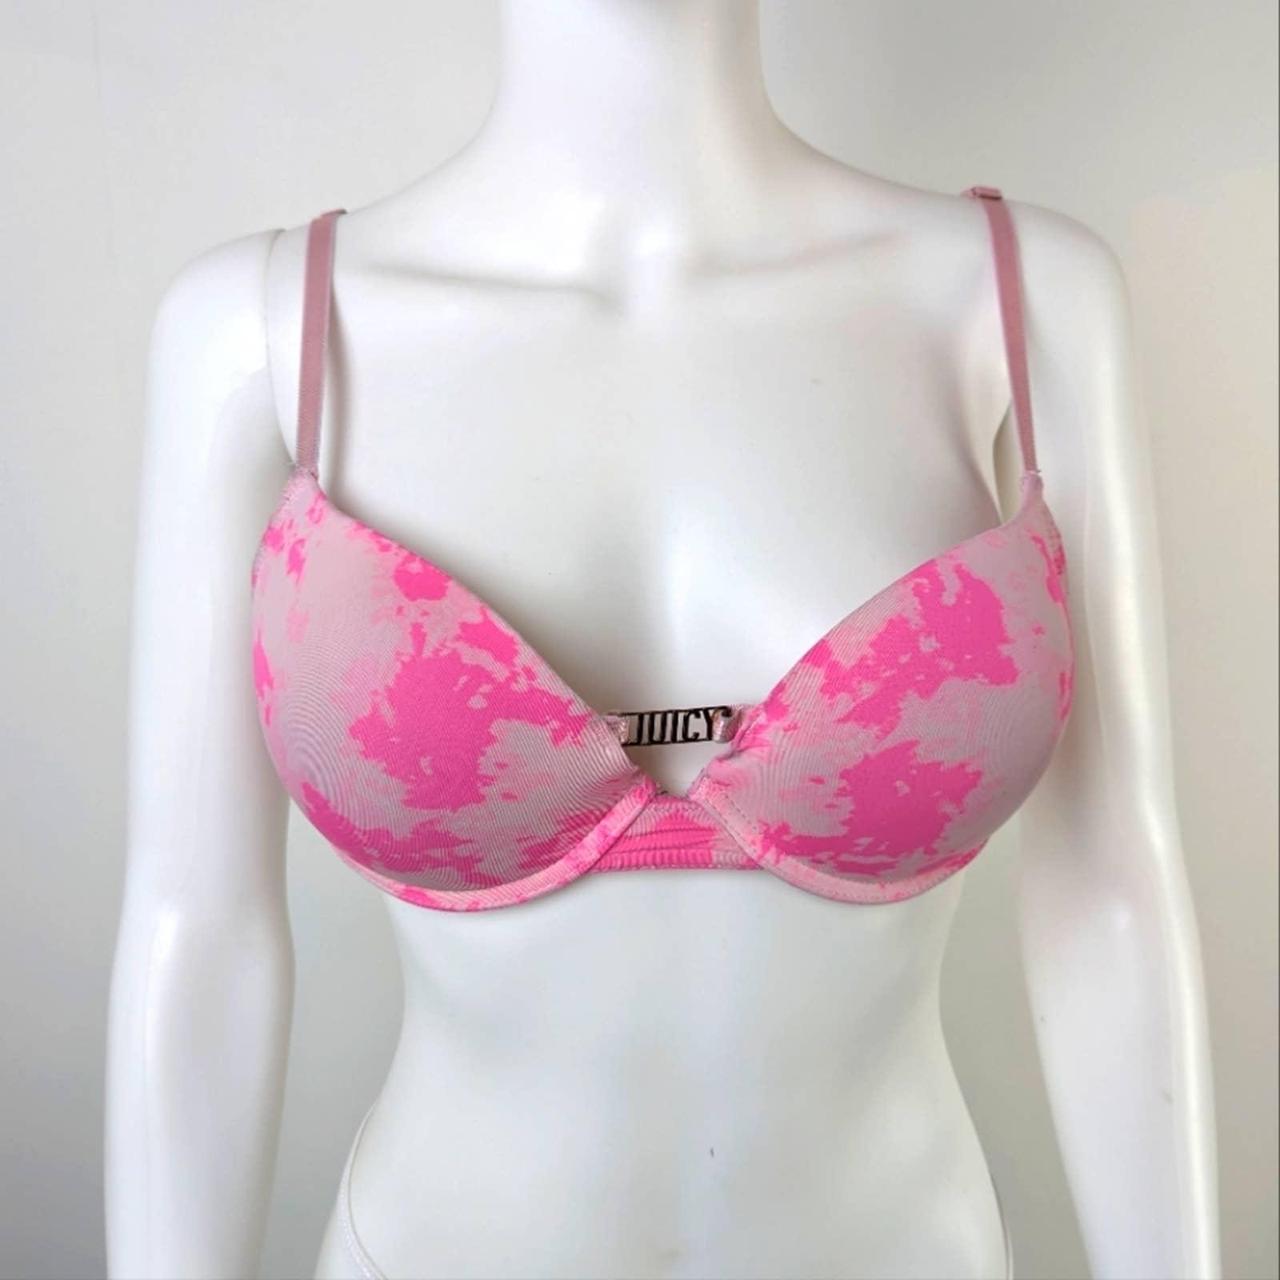 E) Juicy Couture 2 intimates Push up bras Size 38C